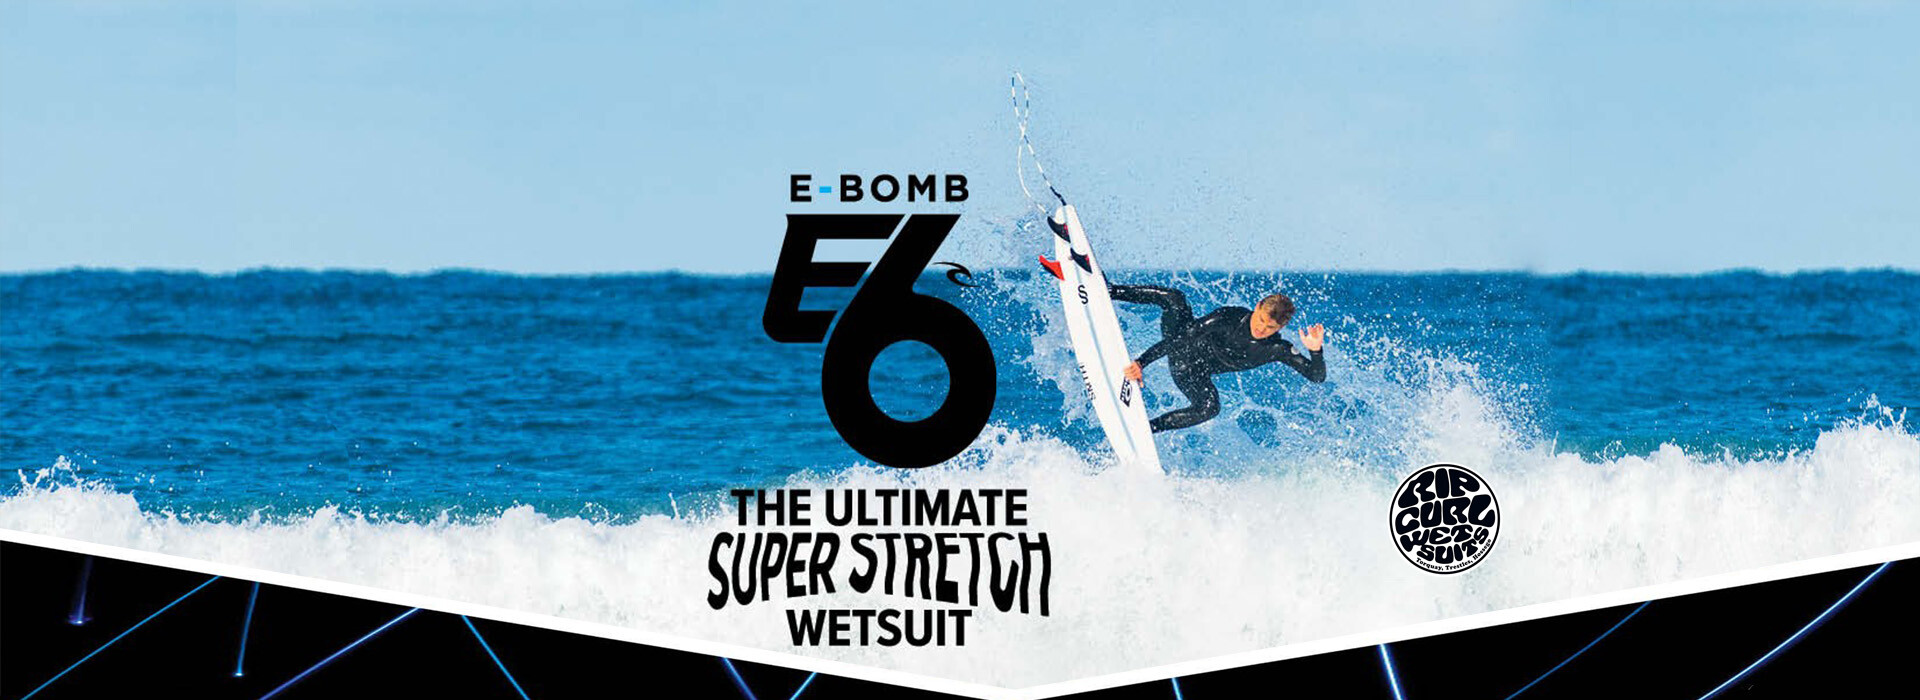 Wetsuit Rip Curl win22